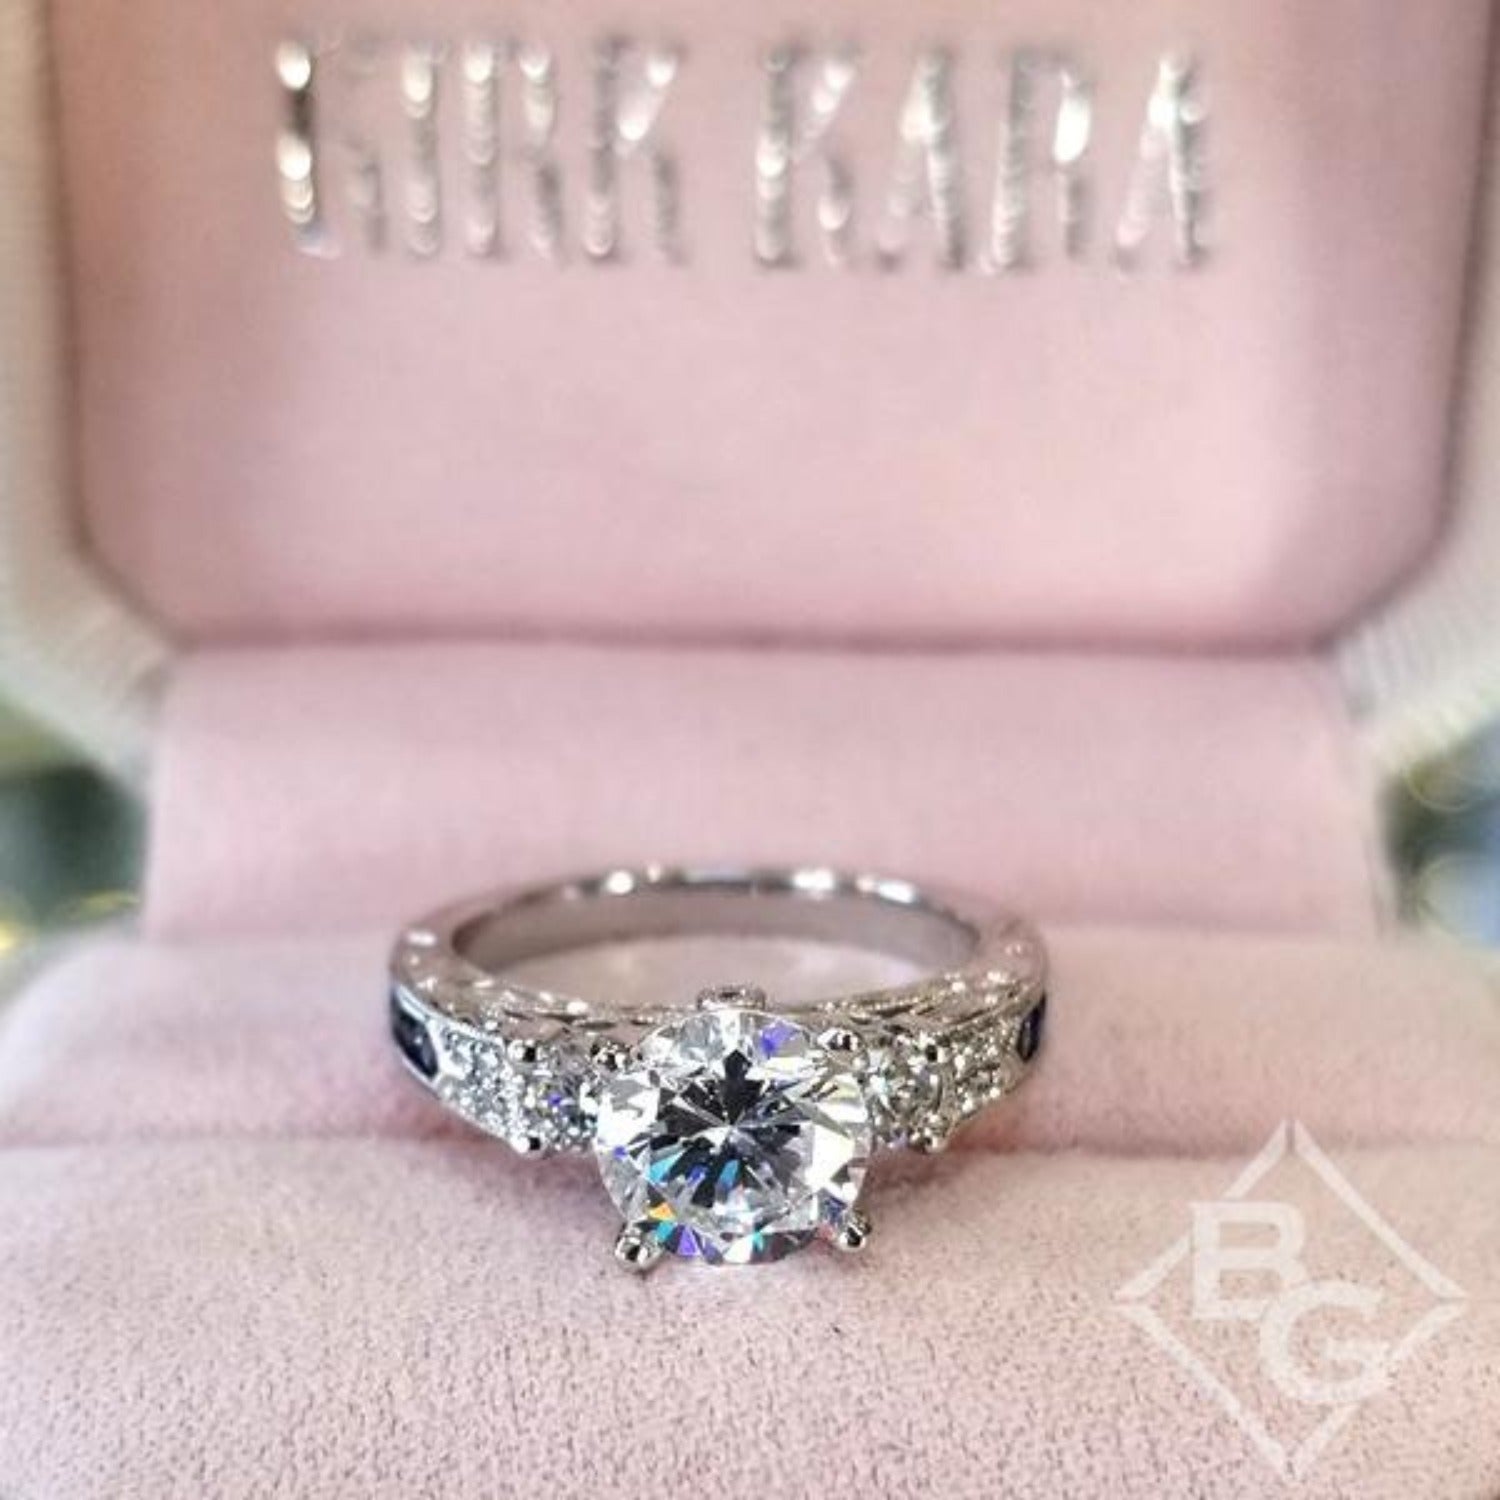 Cubic Zirconia Rings: Shop Engagement Rings, Wedding Bands & More | Kohl's